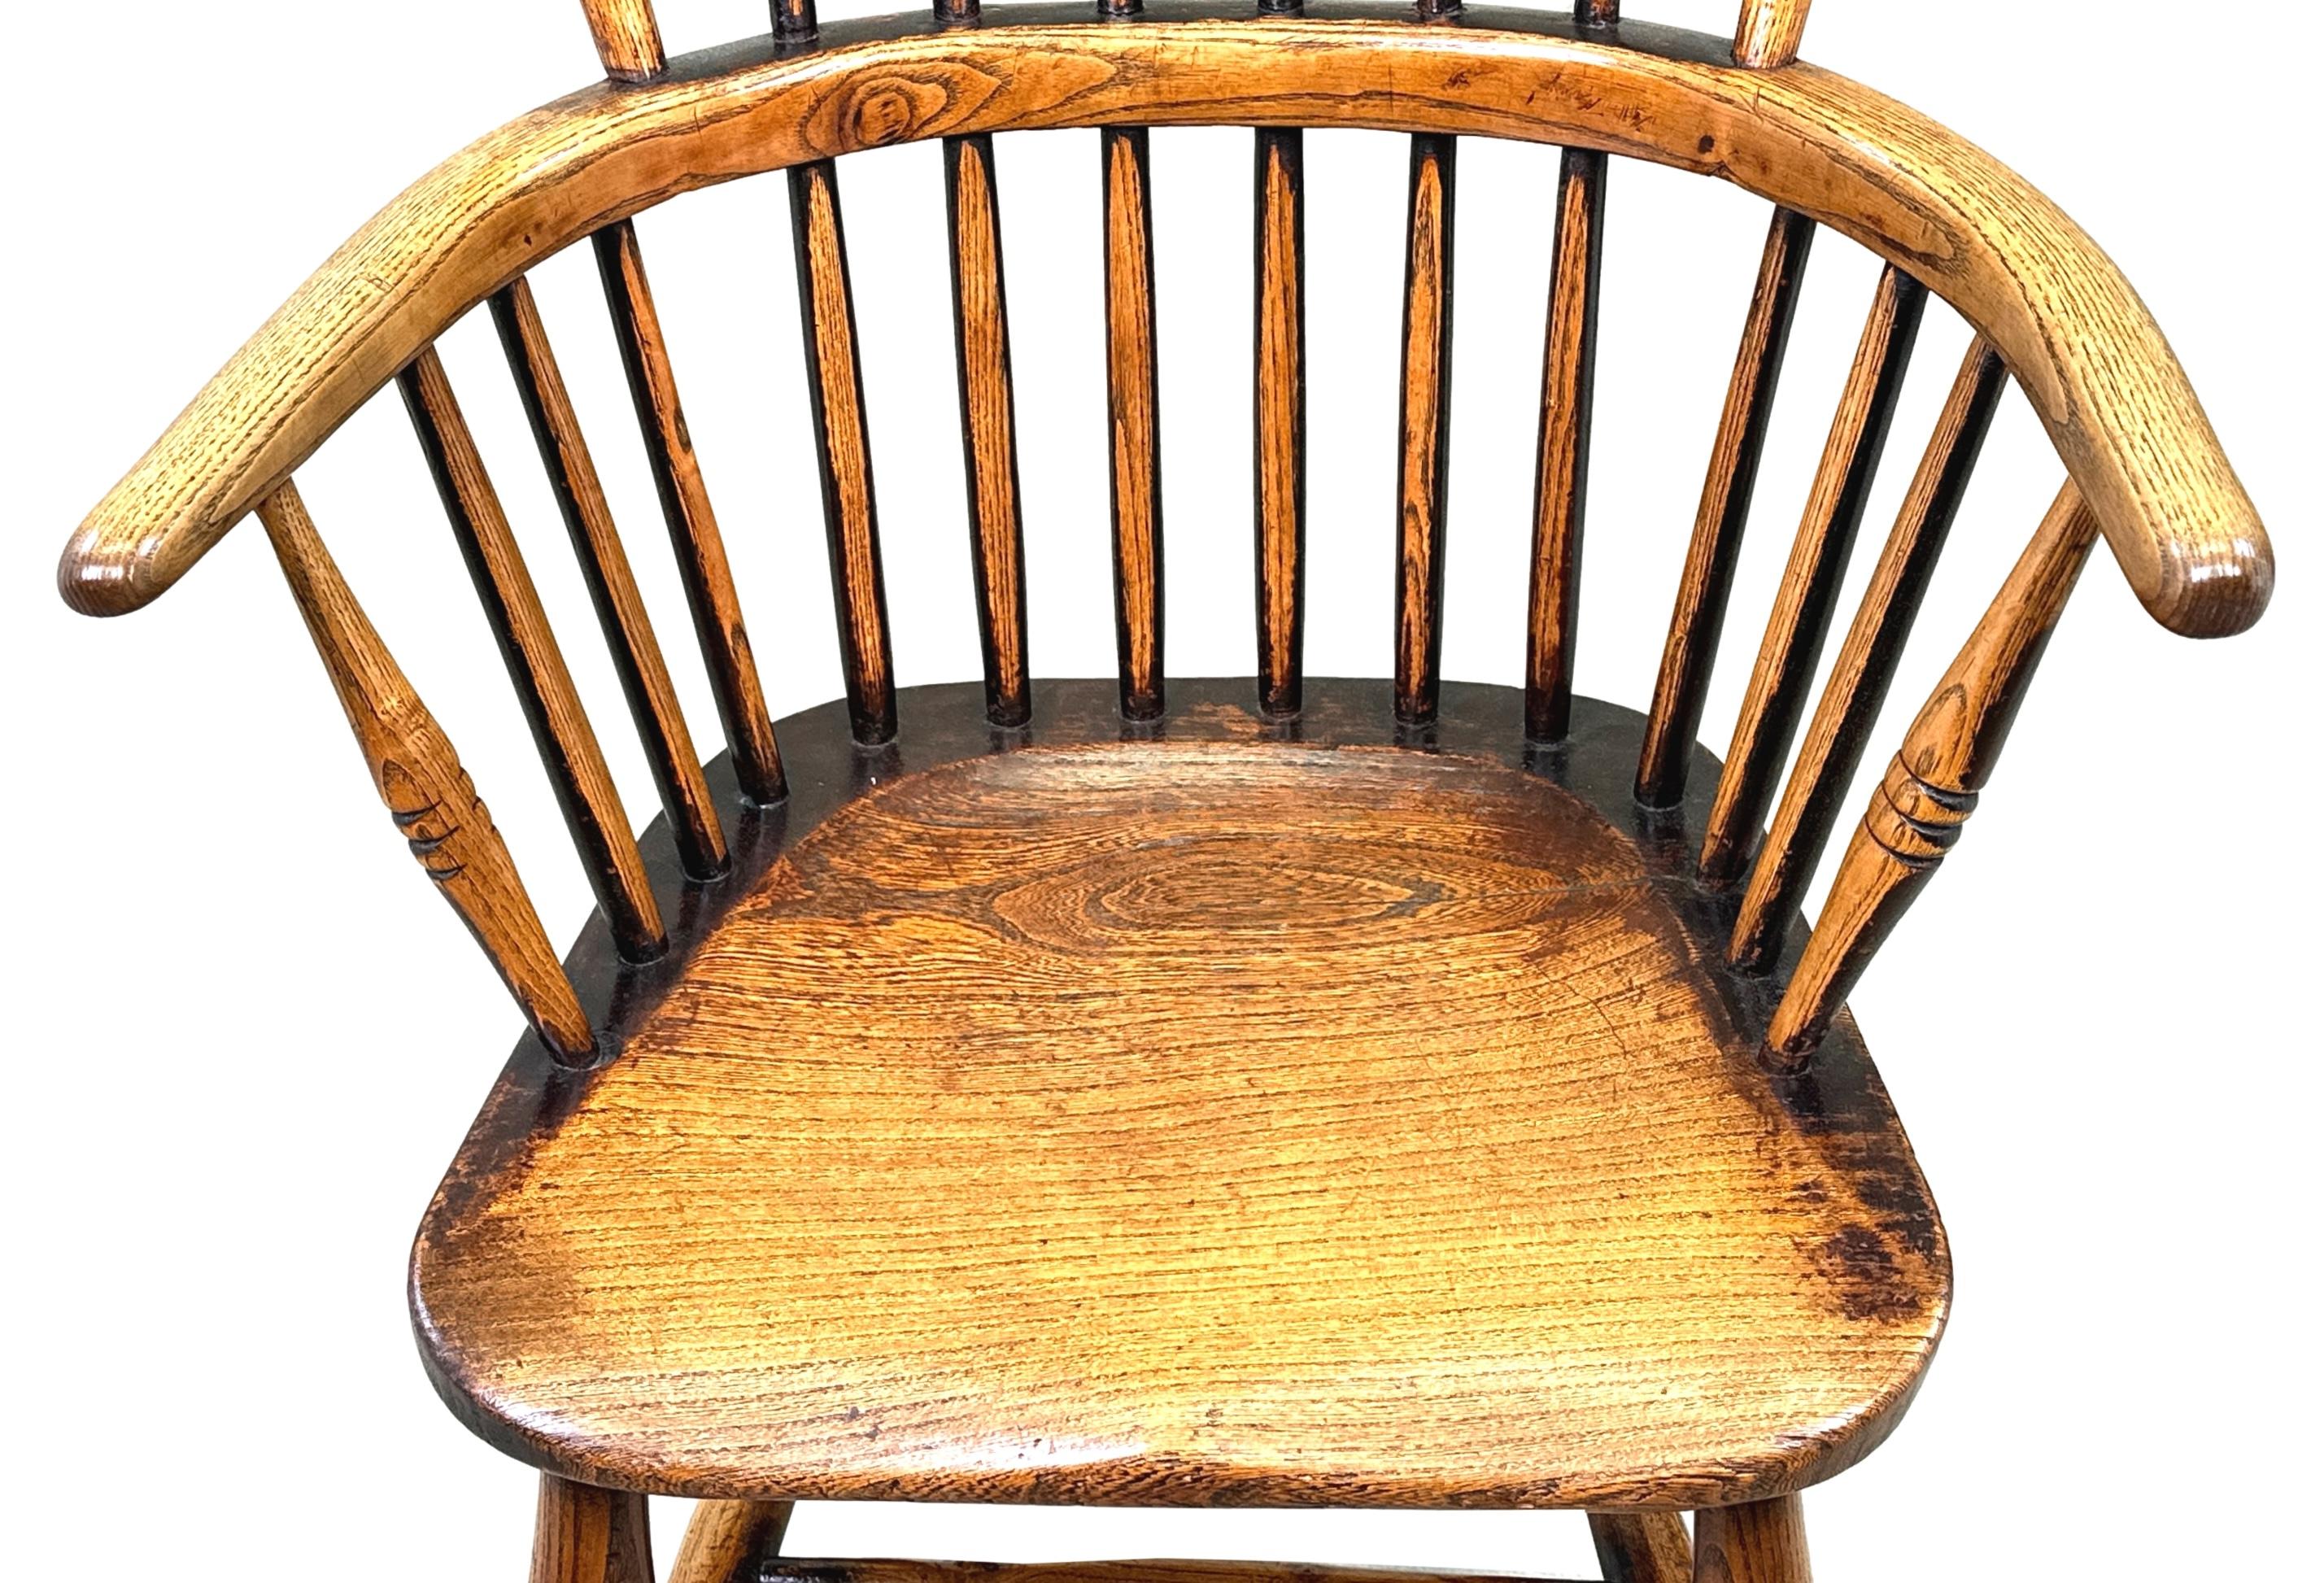 A Charming Mid 19th Century Childs Size, Ash And Elm Windsor Armchair Having Elegant Hooped Curved Back With Stick Turned Upright Supports Over Attractive Figured Seats, Raised On Elegant Turned Legs And H Stretcher, With Unusual Plain Turned Back